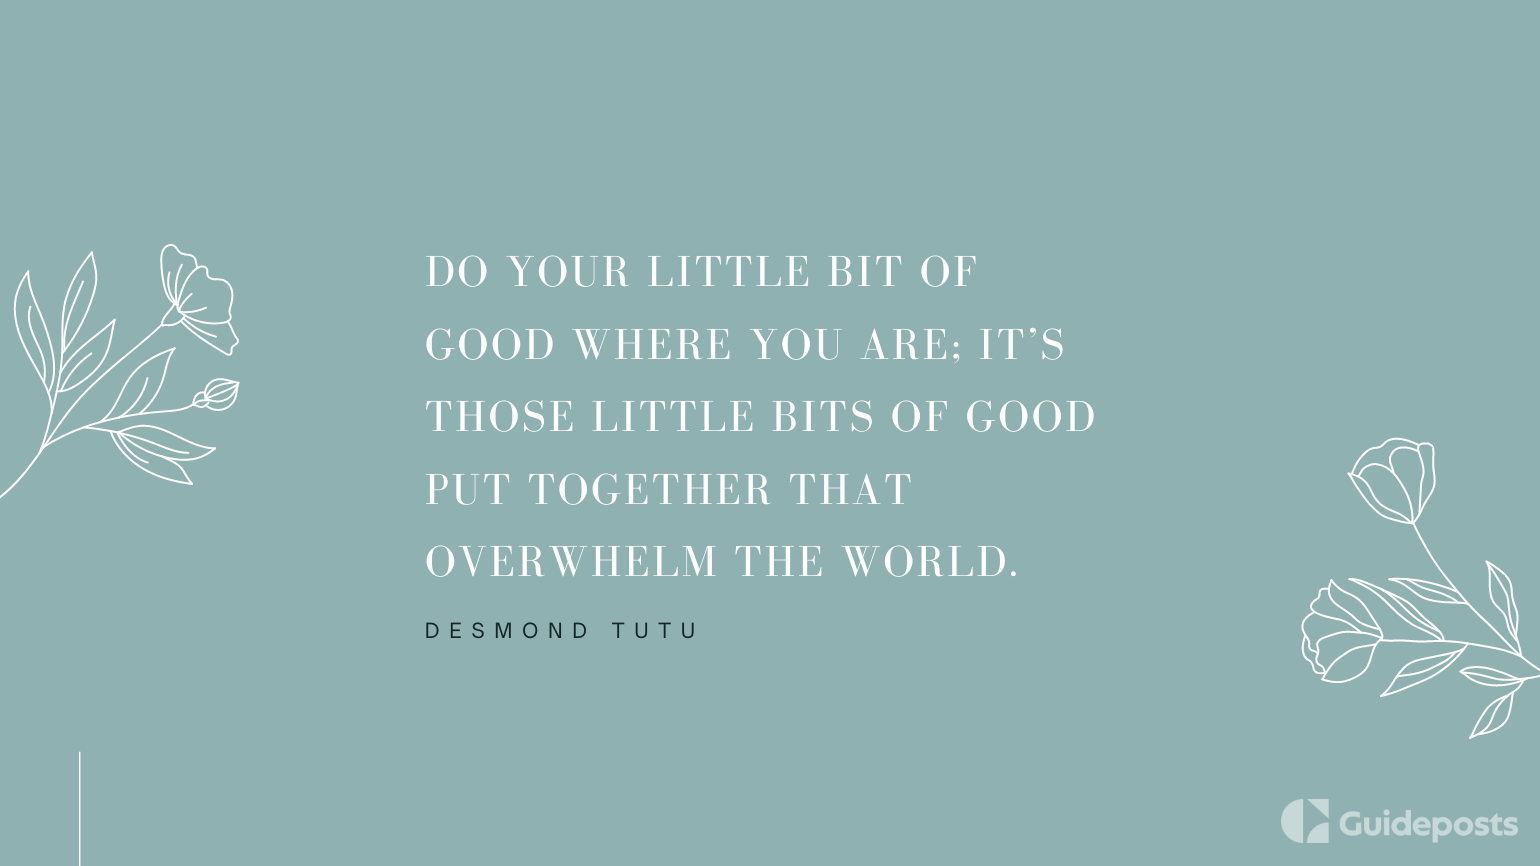 Do your little bit of good where you are; it’s those little bits of good put together that overwhelm the world.  —Desmond Tutu